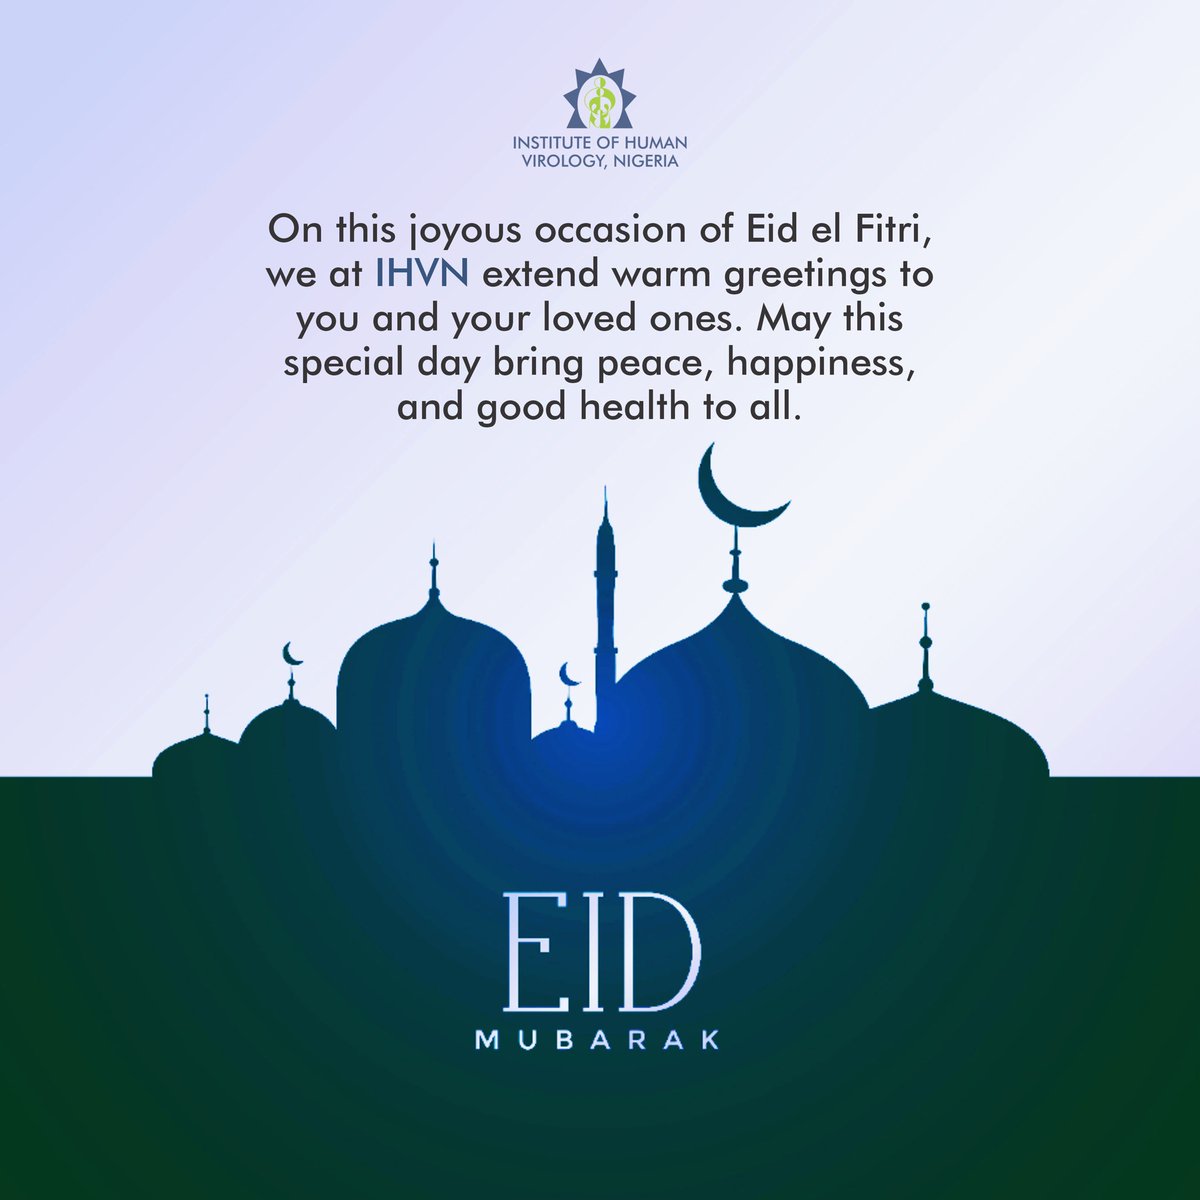 Wishing you a blessed Eid filled with love and harmony. Let's celebrate responsibly, ensuring the safety and well-being of ourselves and our communities. #health #eidelfitr #BarkaDaSallah #ihvn